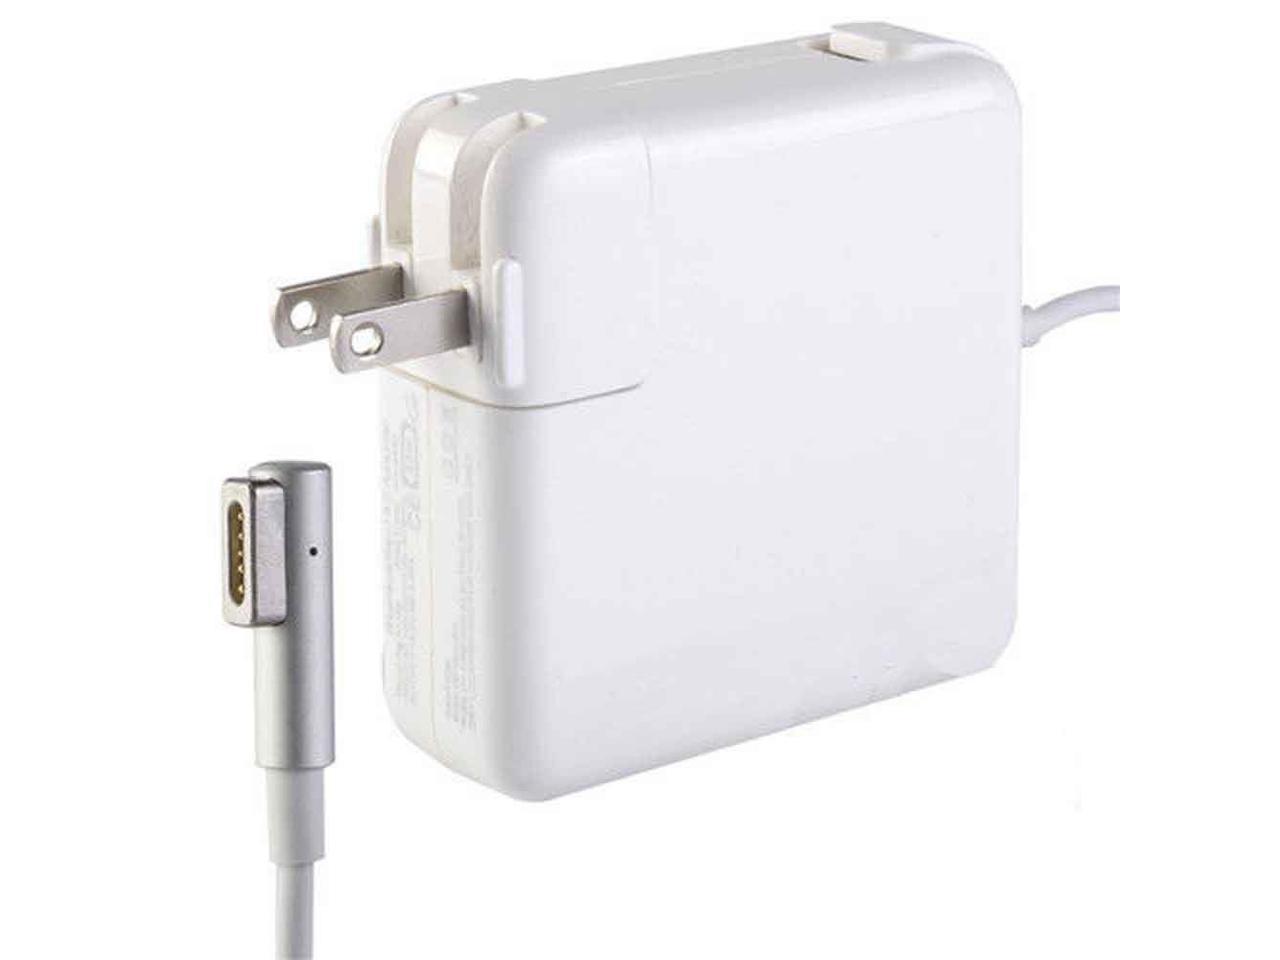 macbook model a1181 charger